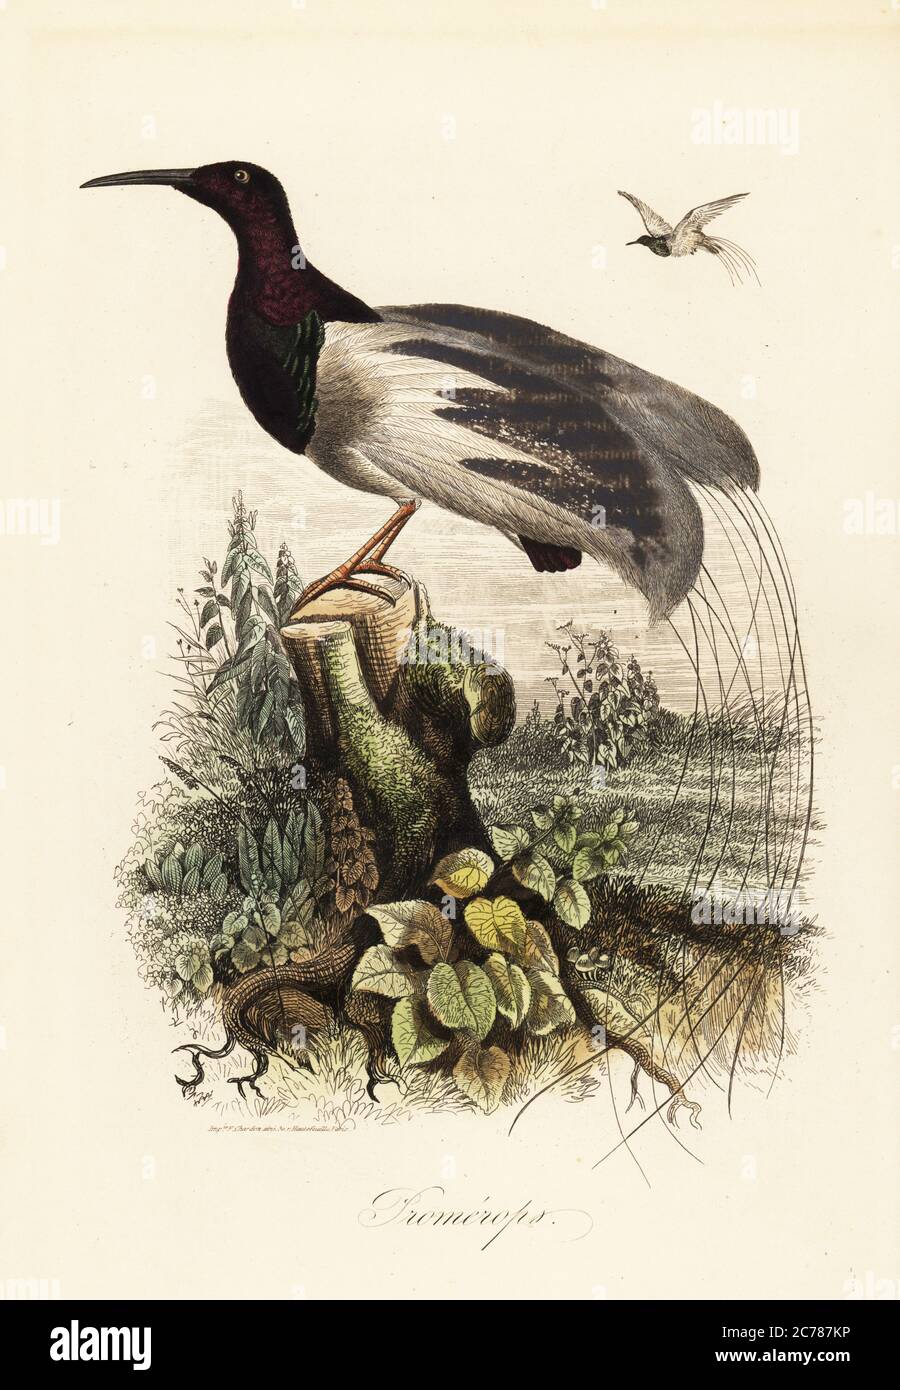 Twelve-wired bird-of-paradise, Seleucidis melanoleucus. Mislabeled Promerops. Copied from an illustration by Adolph Fries in Felix-Edouard Guerin-Meneville's Dictionnaire Pittoresque d'Histoire Naturelle. Handcoloured steel engraving printed by F. Chardon from Achille Comte’s Musee d’Histoire Naturelle, Museum of Natural History, Gustave Hazard, Paris, 1854. Stock Photo